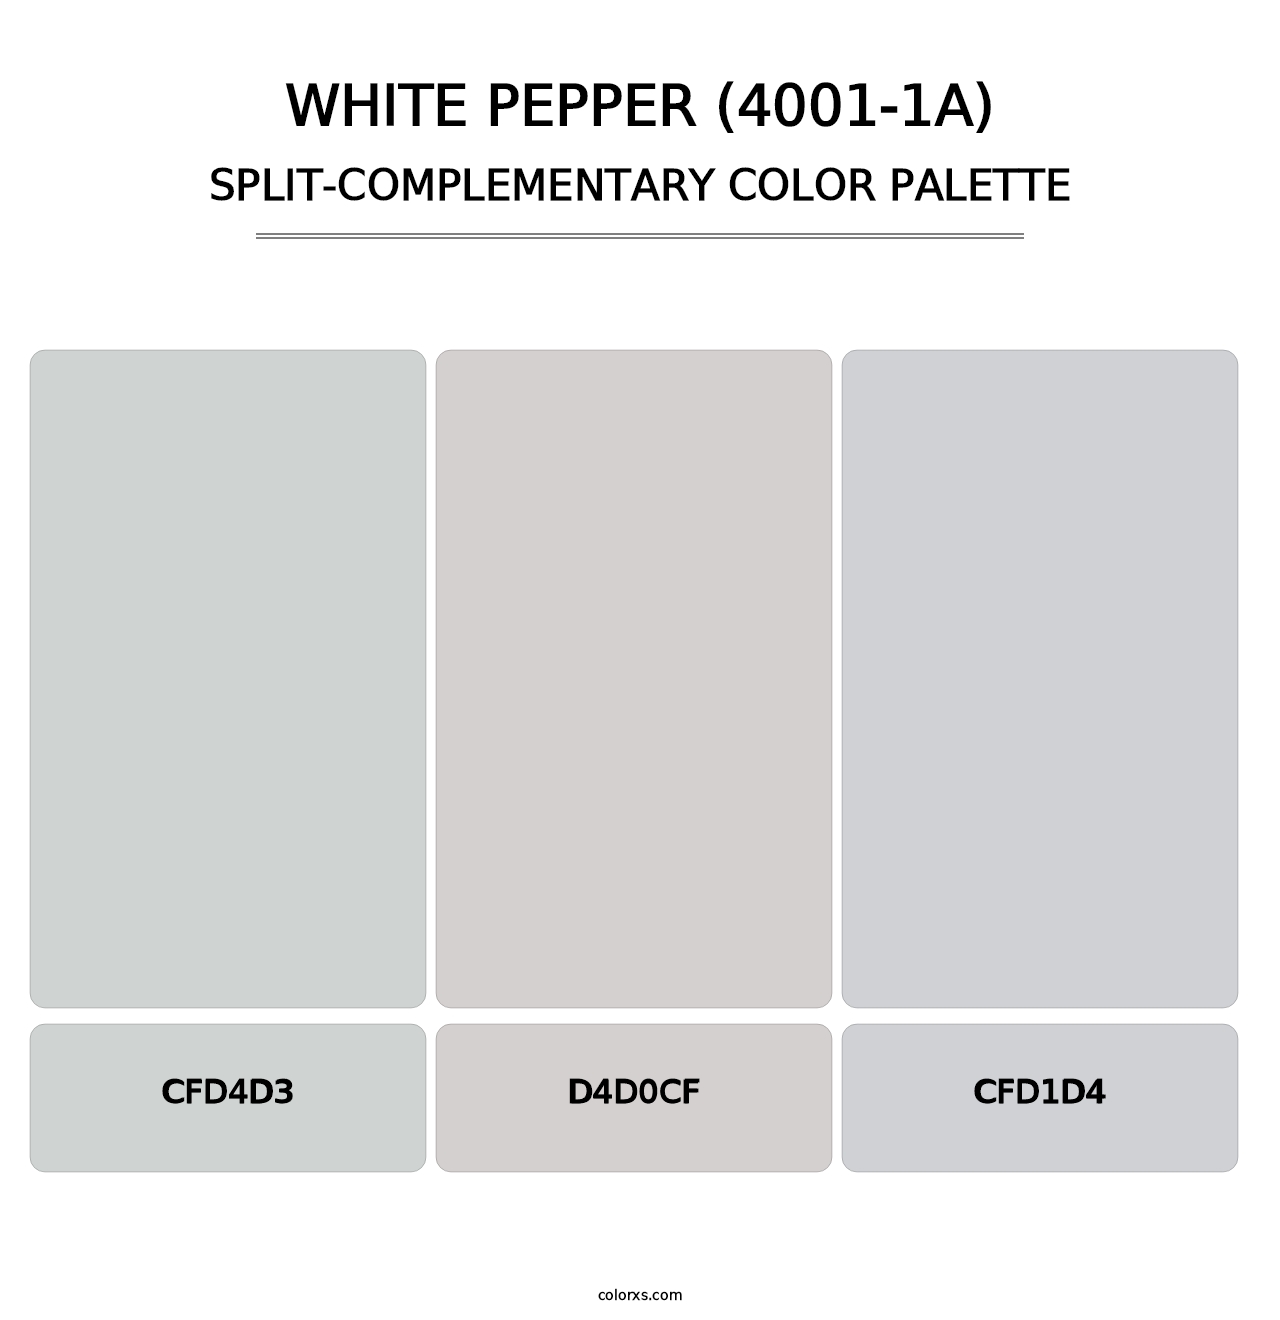 White Pepper (4001-1A) - Split-Complementary Color Palette